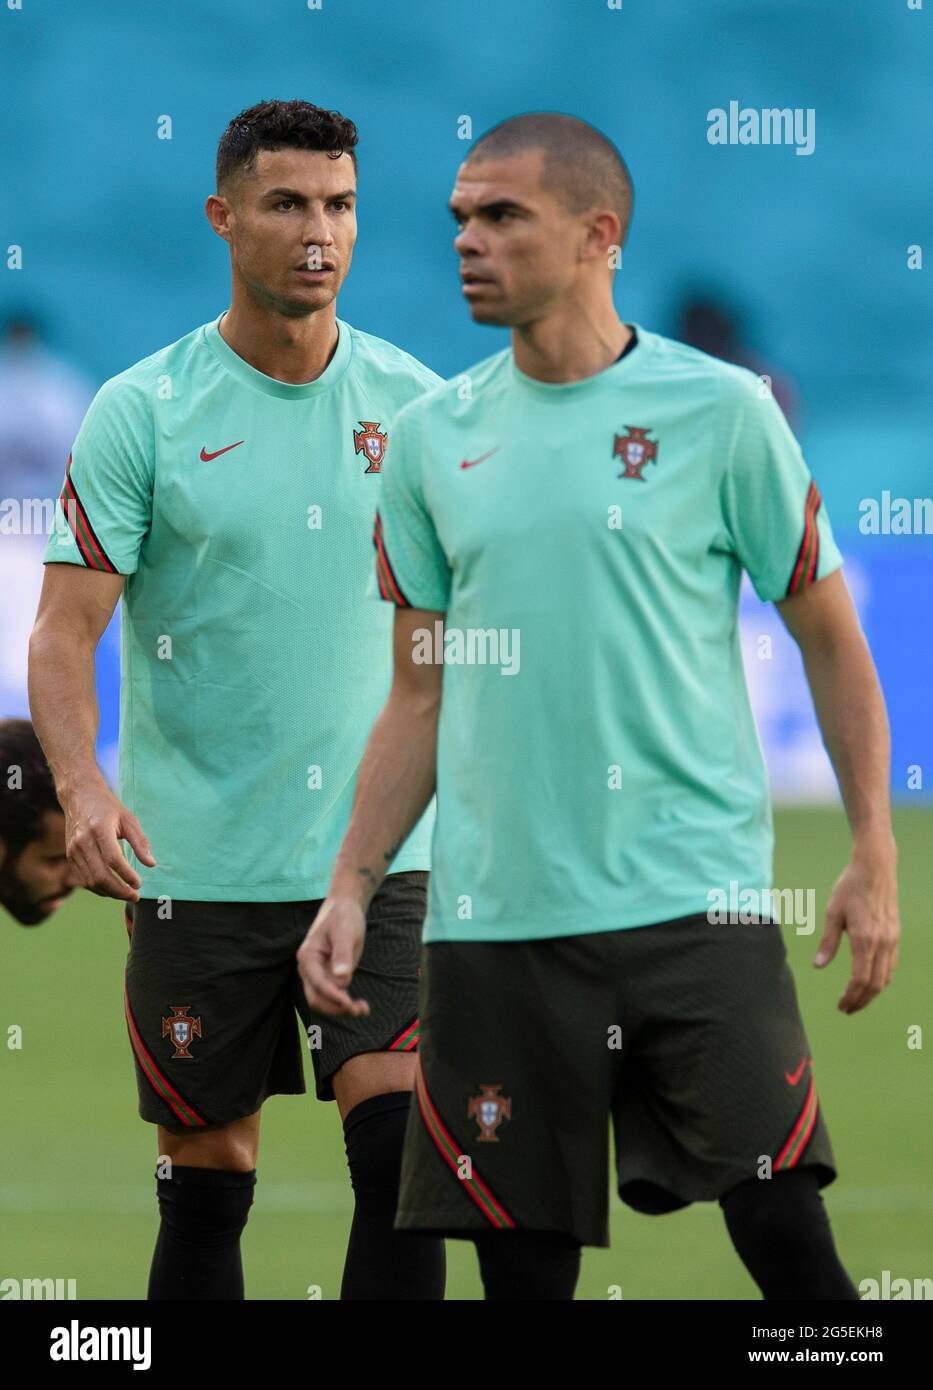 Seville. 26th June, 2021. Cristiano Ronaldo (L) and Pepe of Portugal attend a training session in Seville, Spain, June 26, 2021, on the eve of the UEFA Euro 2020 Championship Round of 16 match against Belgium. Credit: Meng Dingbo/Xinhua/Alamy Live News Stock Photo